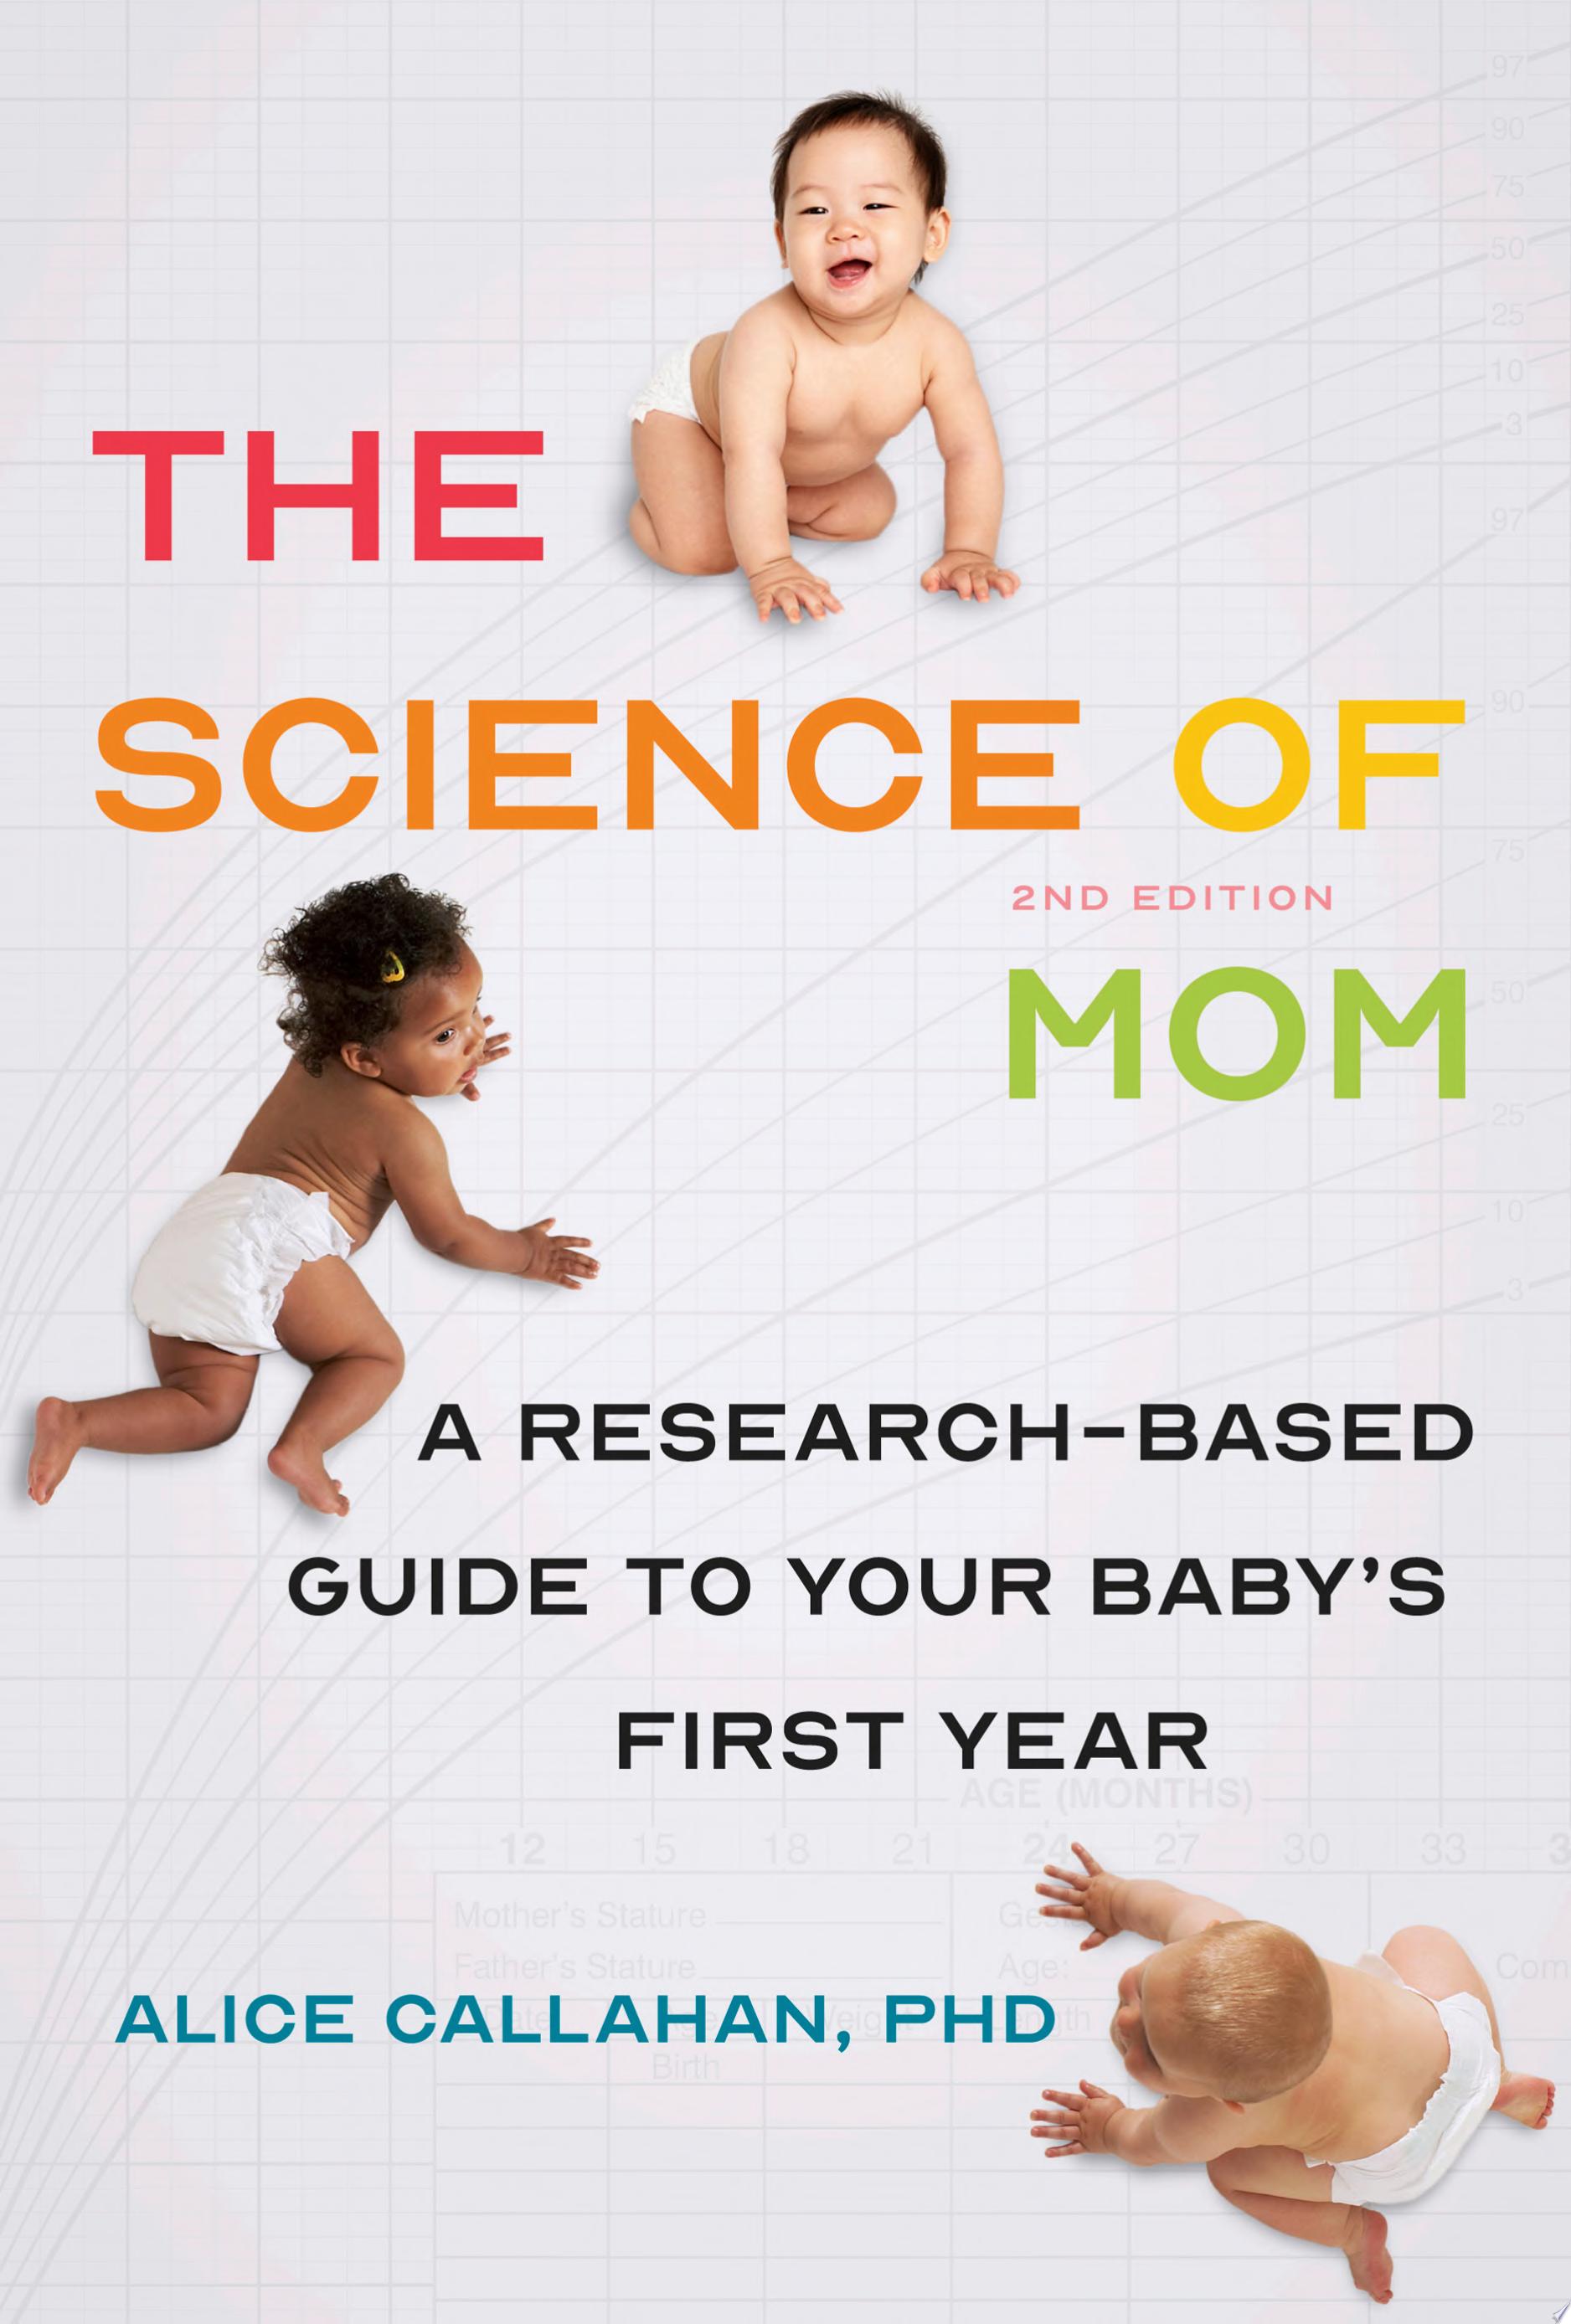 Image for "The Science of Mom"